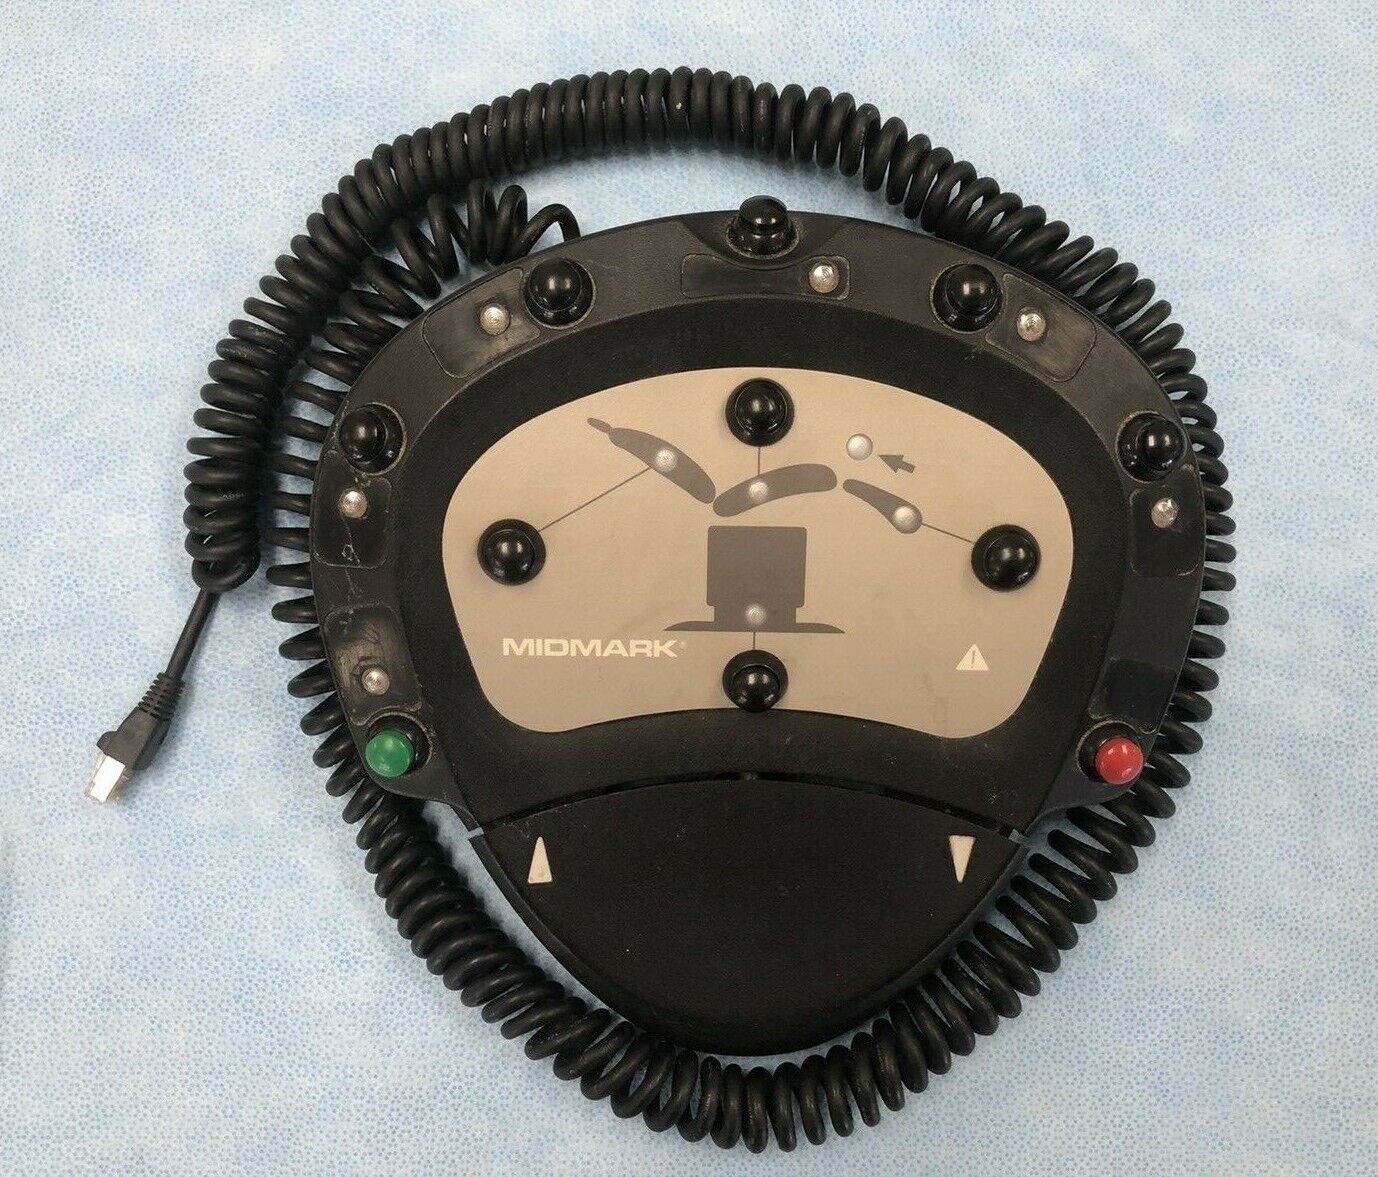 Pre-owned Midmark 75l 419 Programmable Foot Control Genuine Original